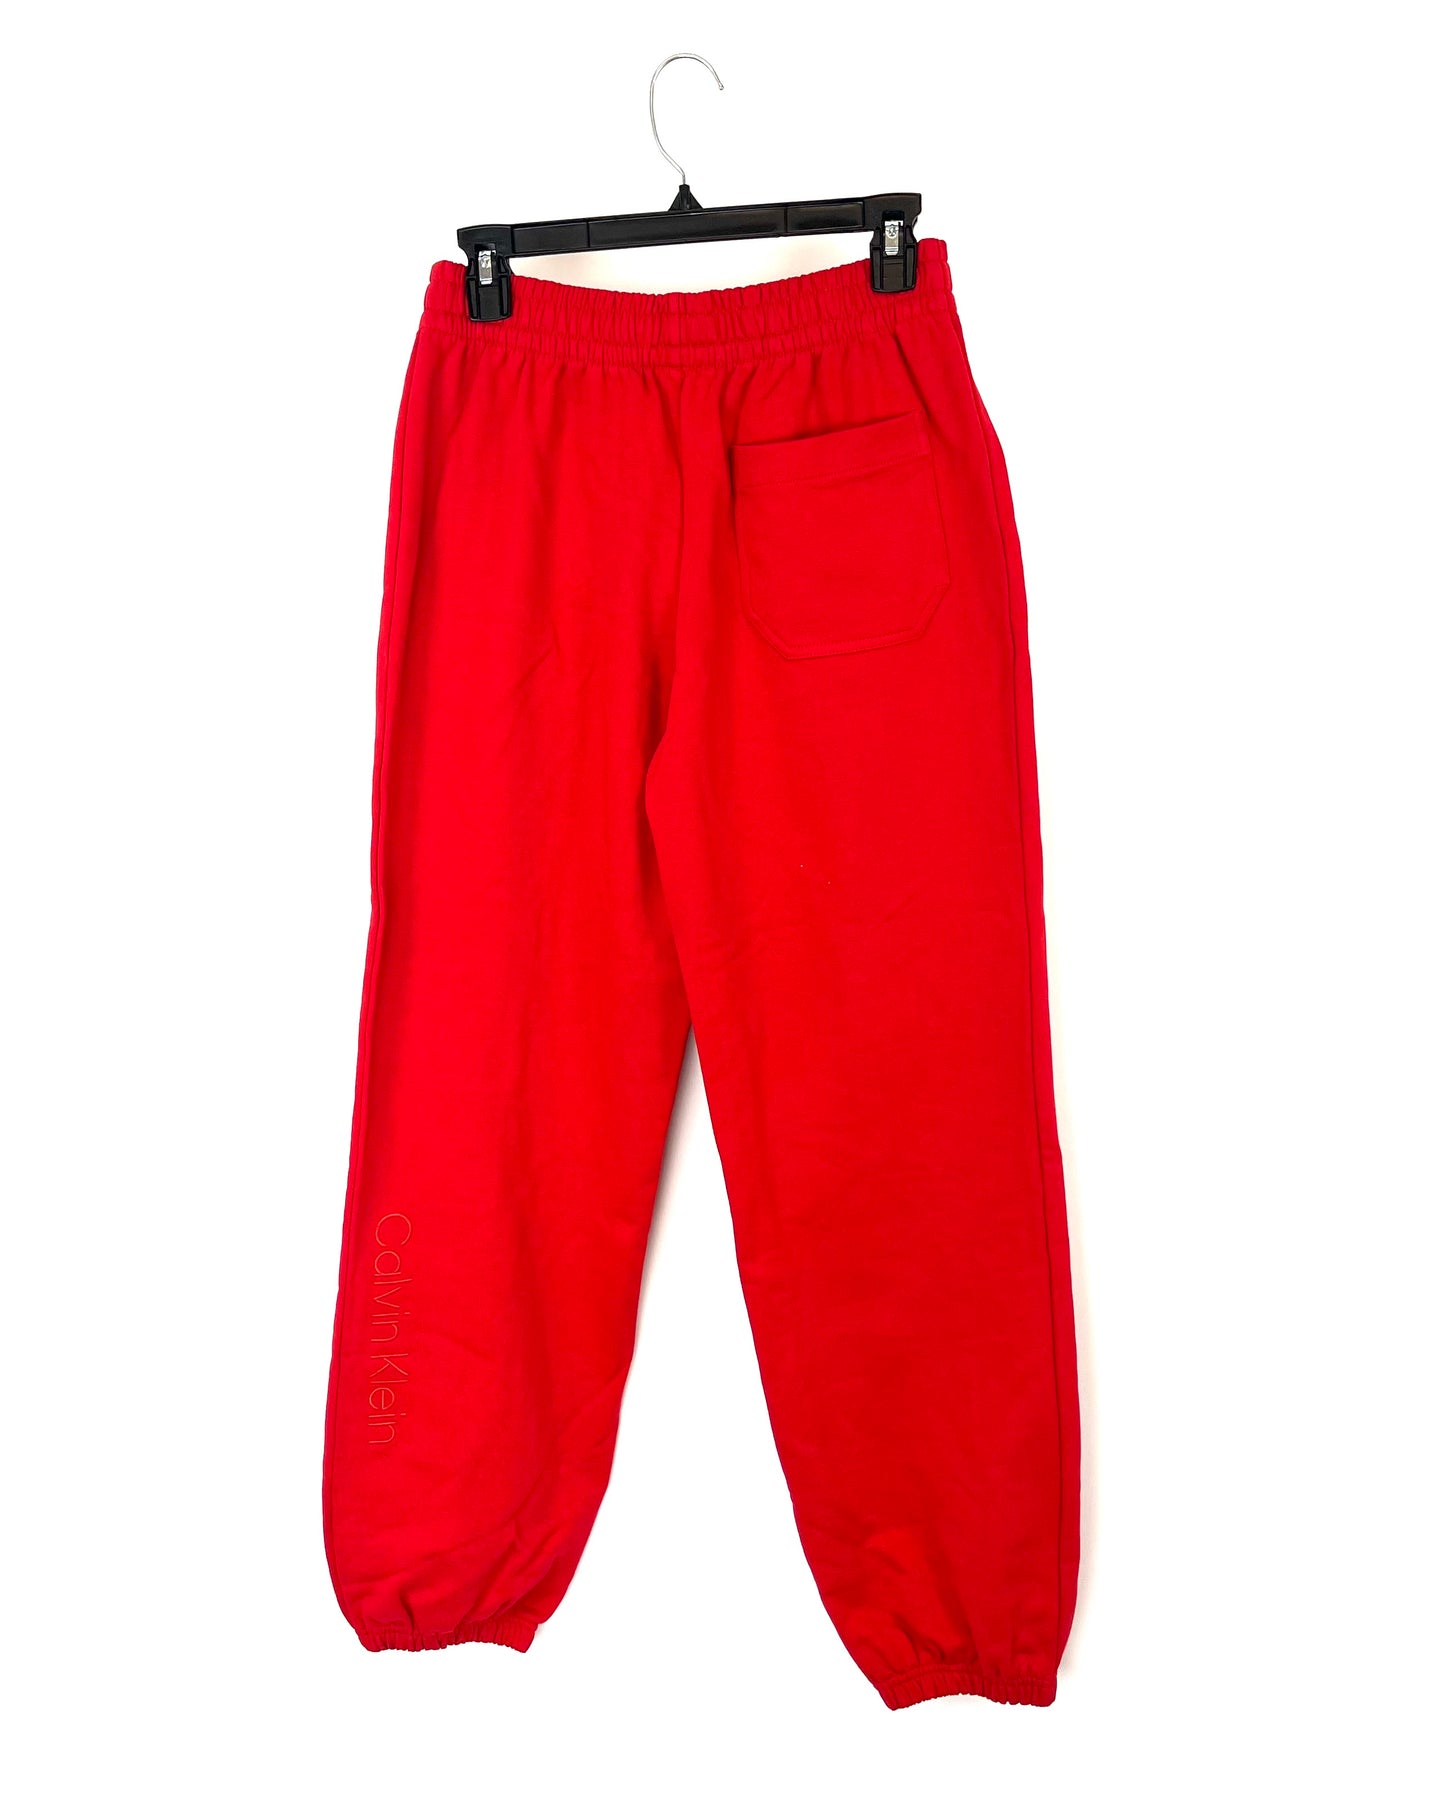 Calvin Klein Red Athletic - Fashion – The Small Sweatpants Foundation